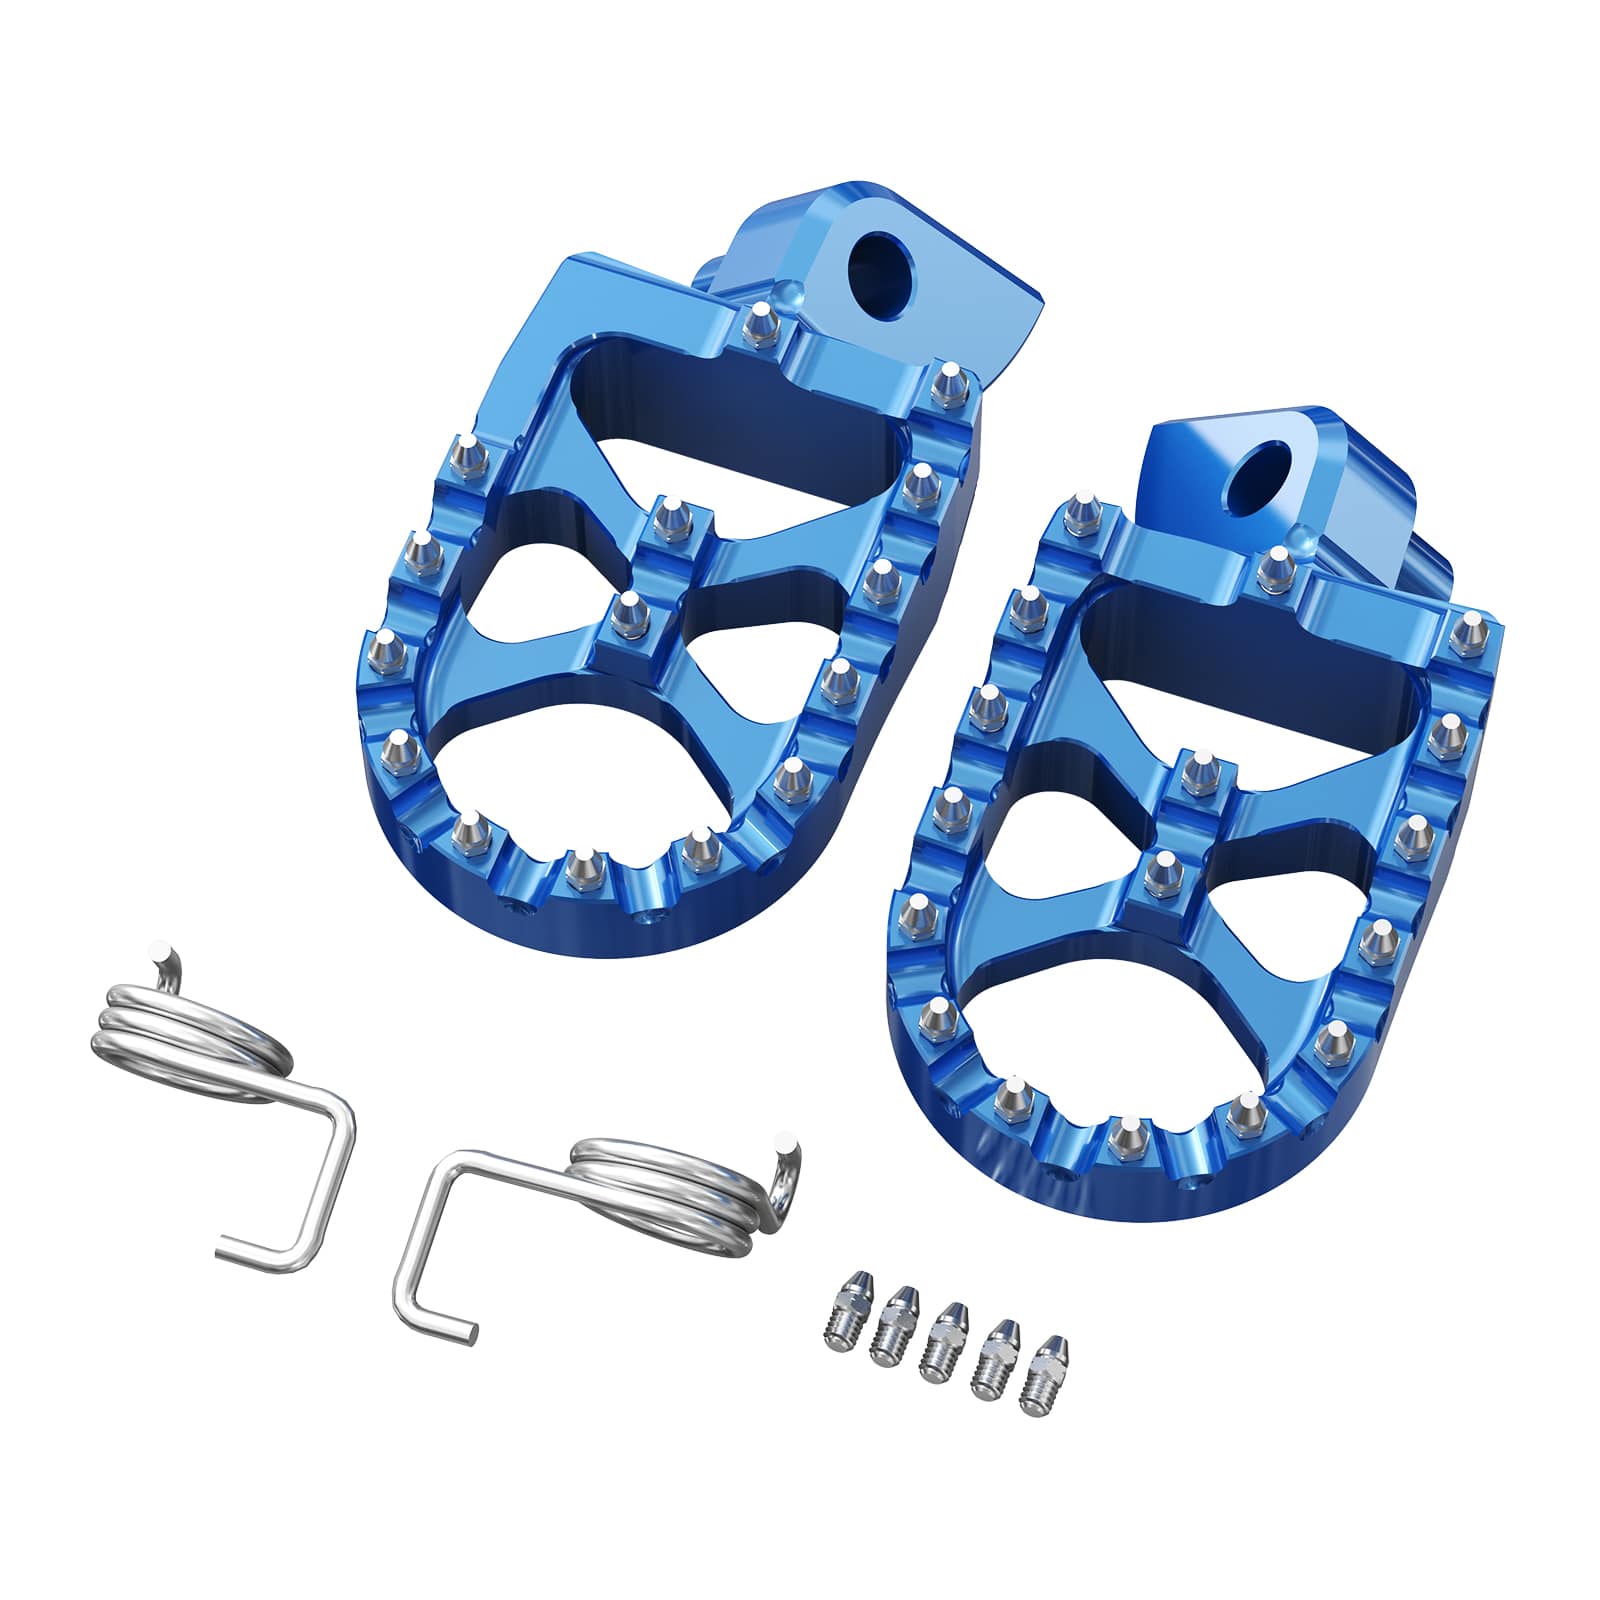 Forged Foot Pegs Rests Pedals For KTM Yamaha Husqvarna